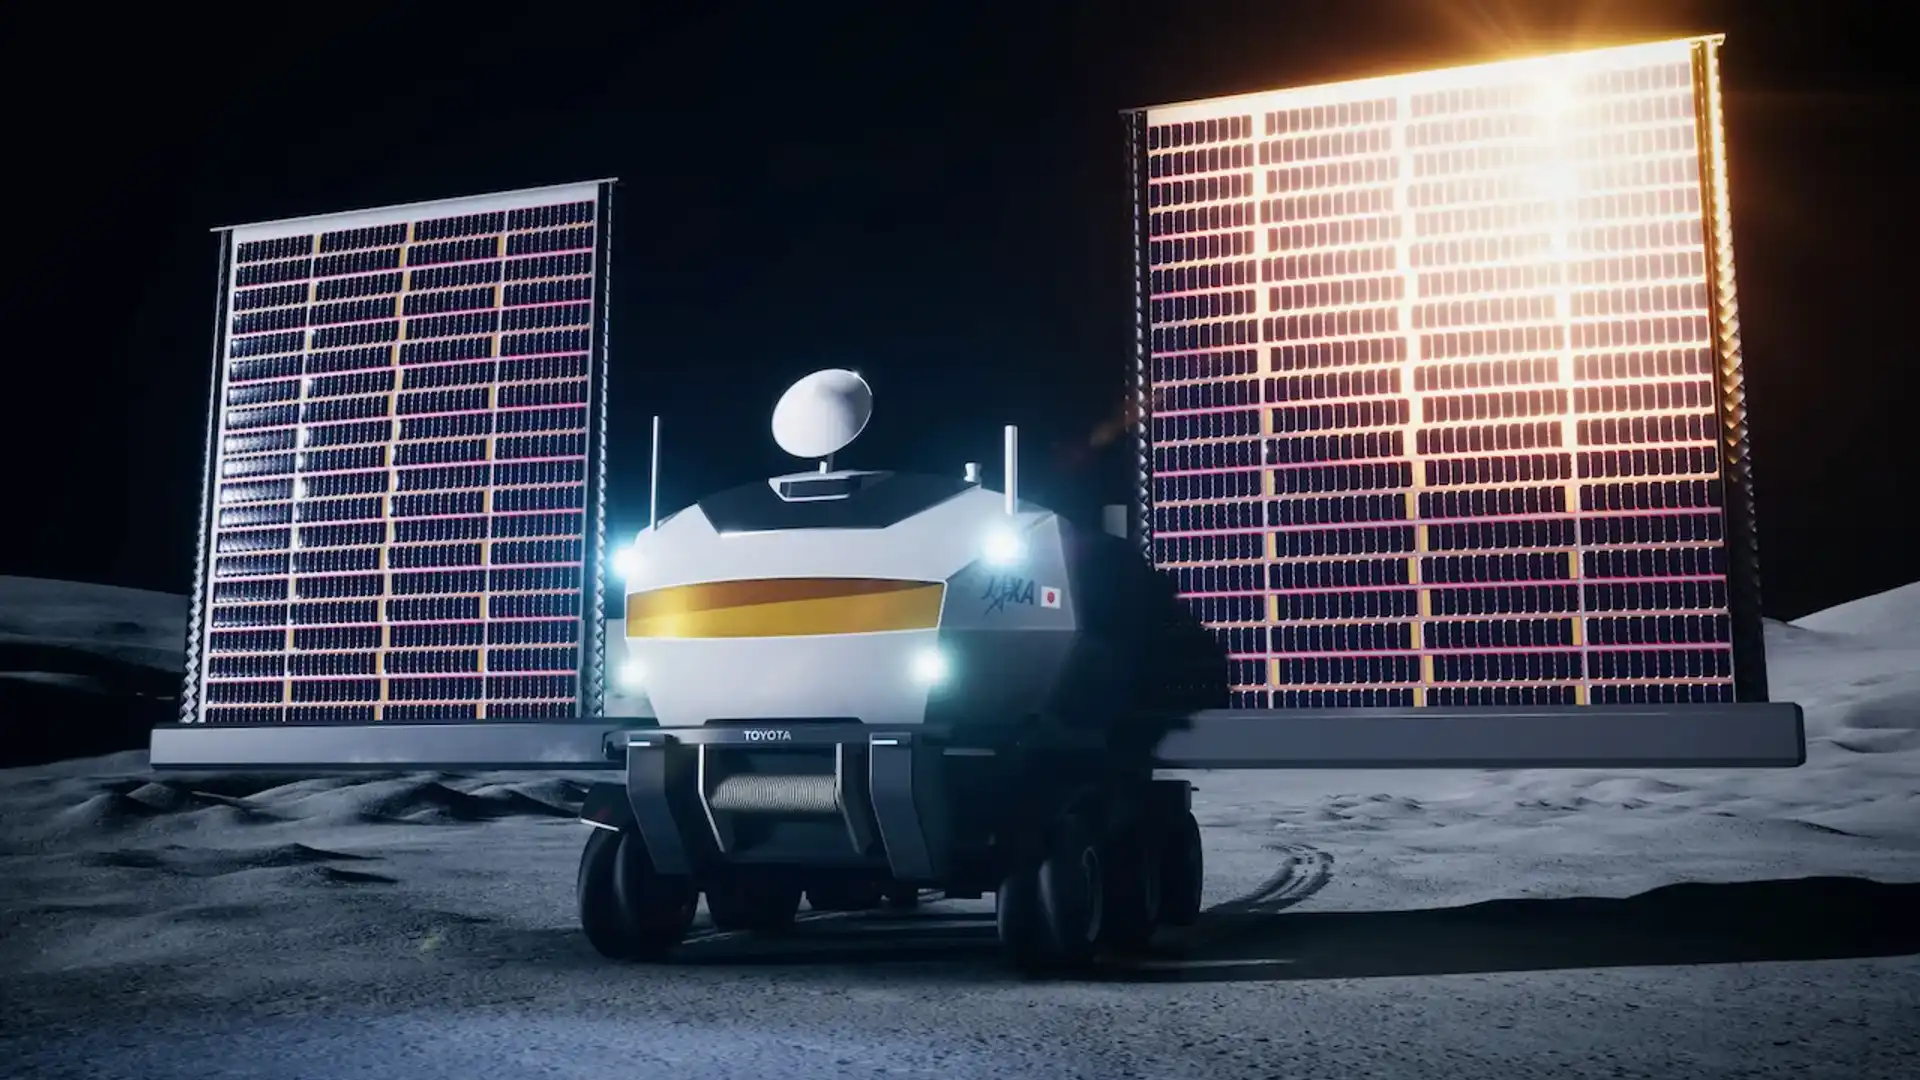 NASA mission will drive a Toyota Lunar Cruiser on the Moon